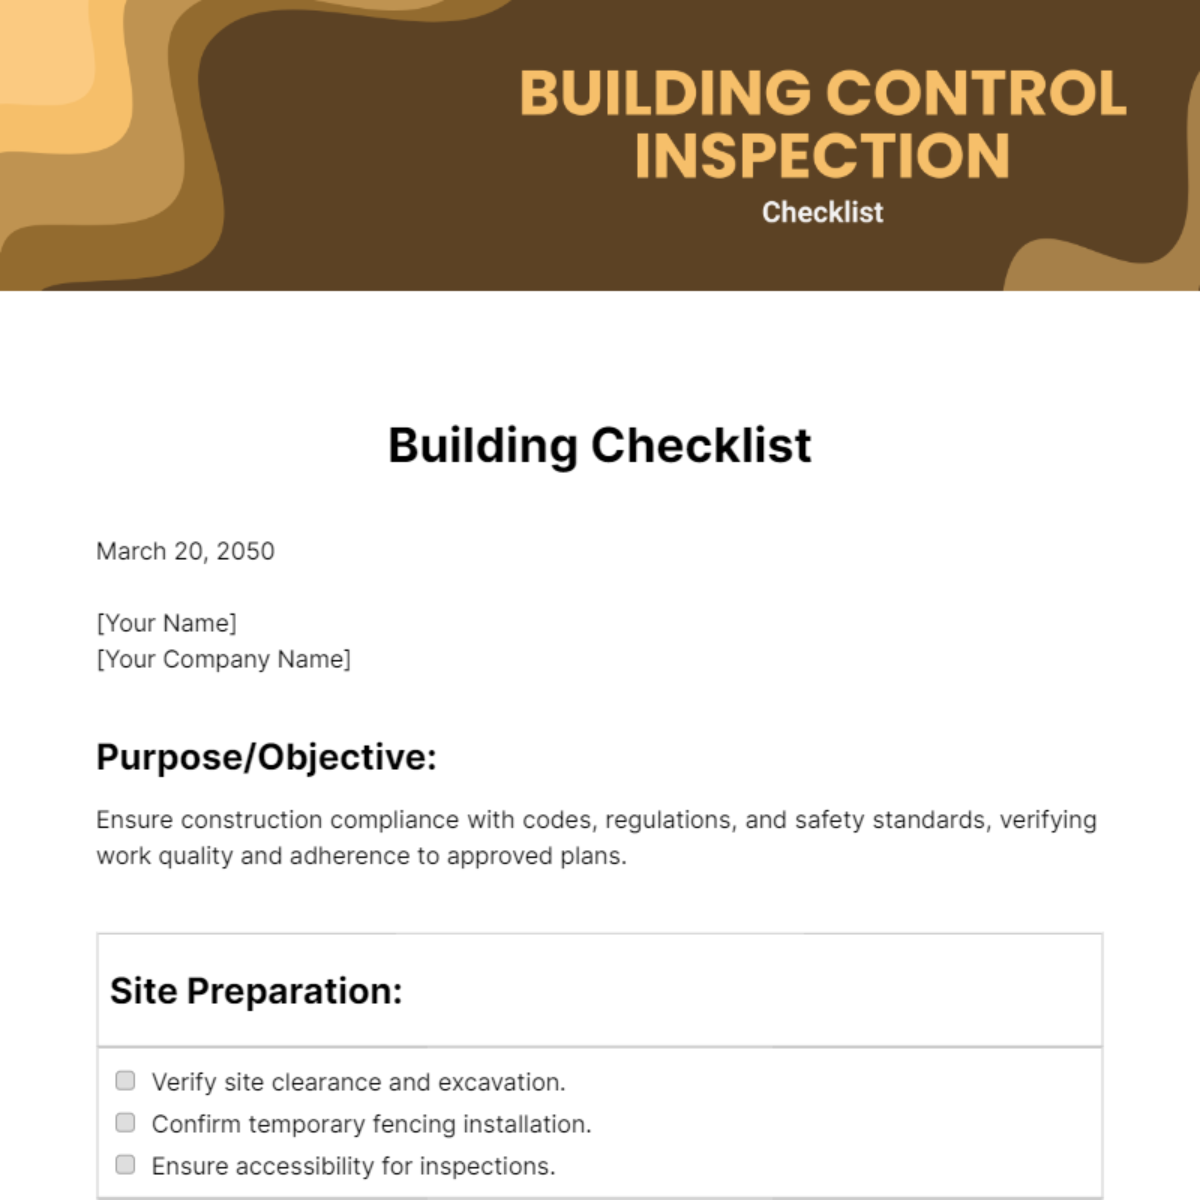 Building Control Inspection Checklist Template